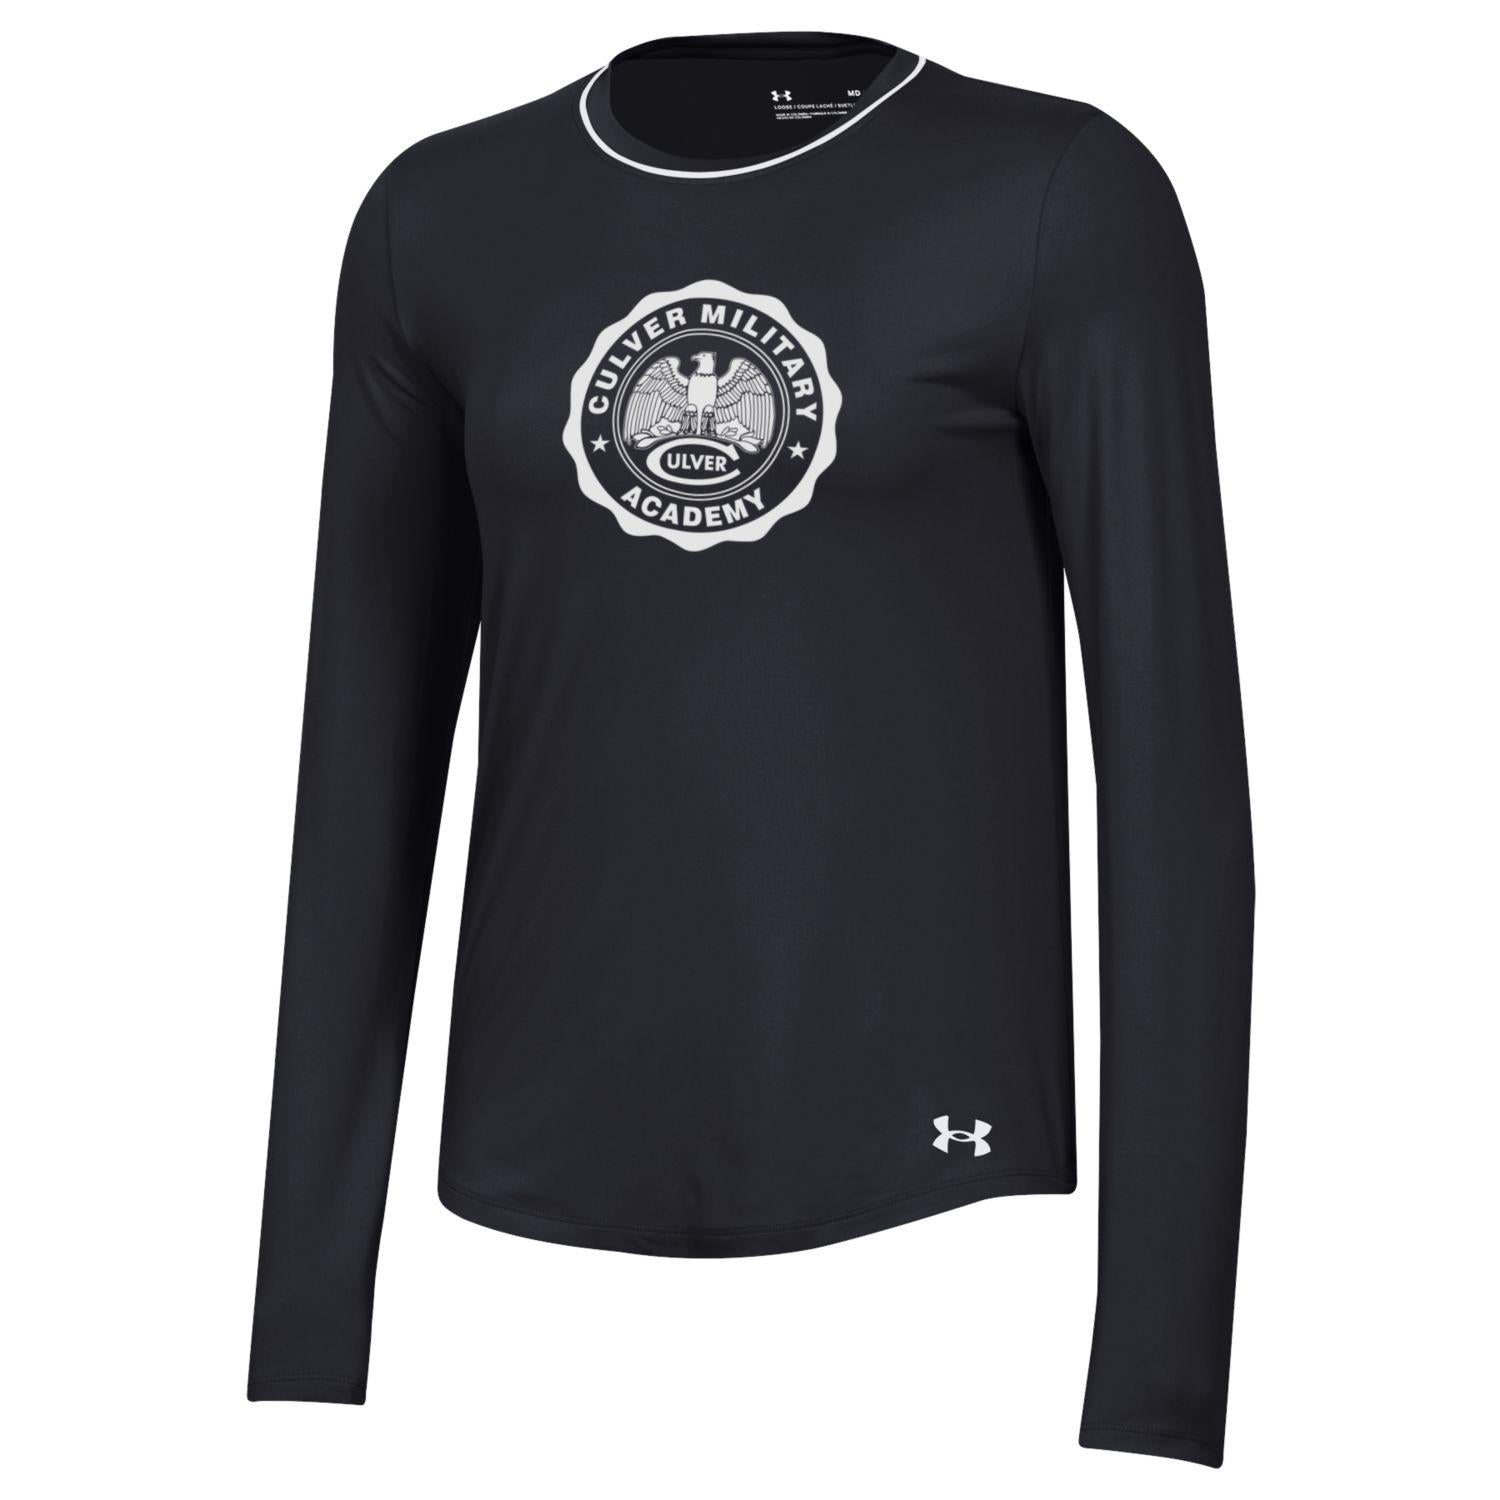 Under Armour Womens Knockout Long Sleeve Tee - Black